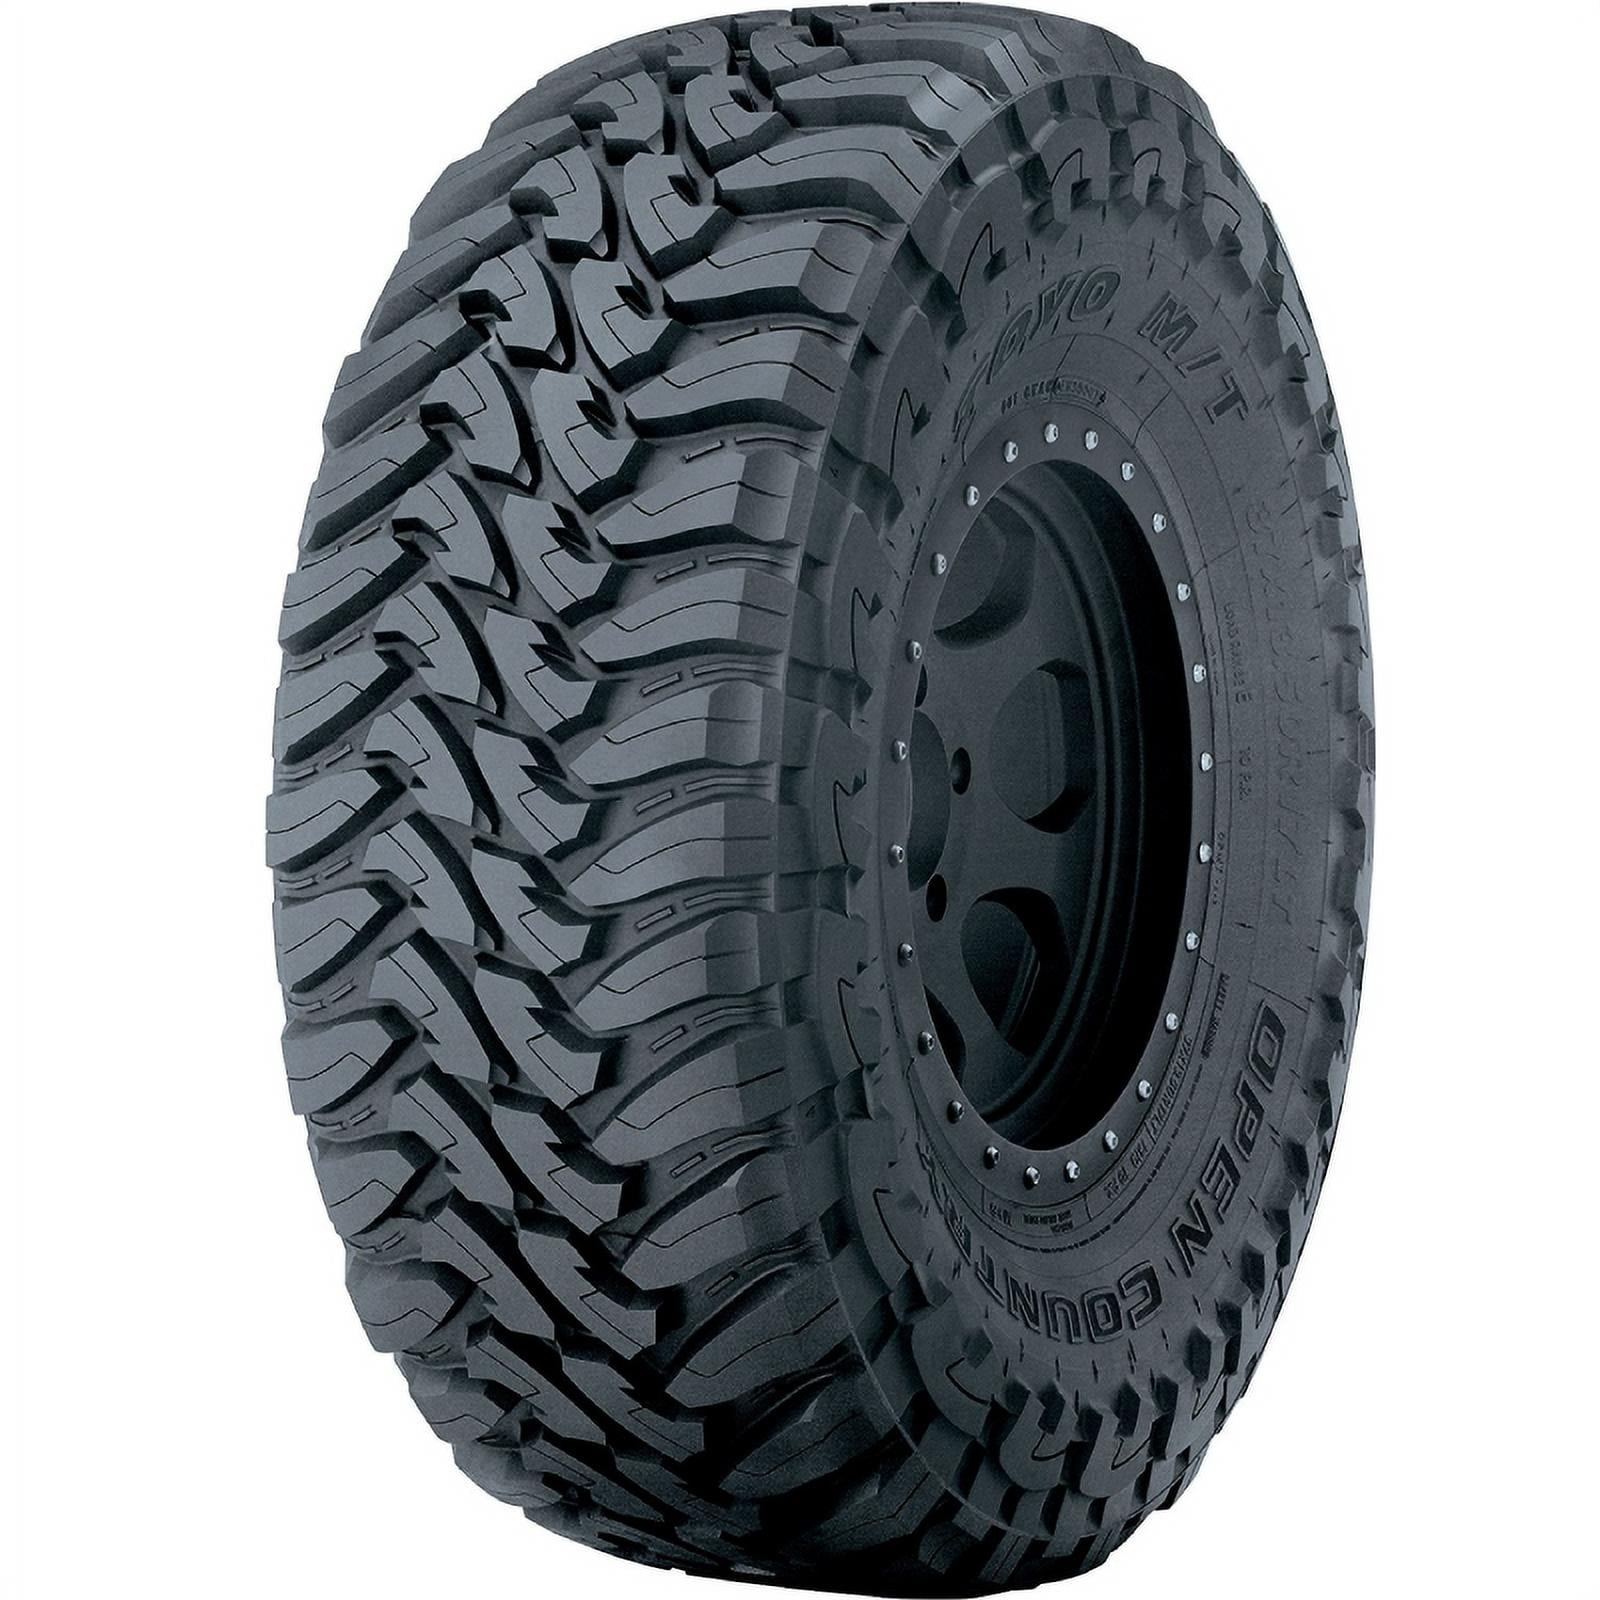 Toyo Open Country M/T 305/70R16 124 P Tire